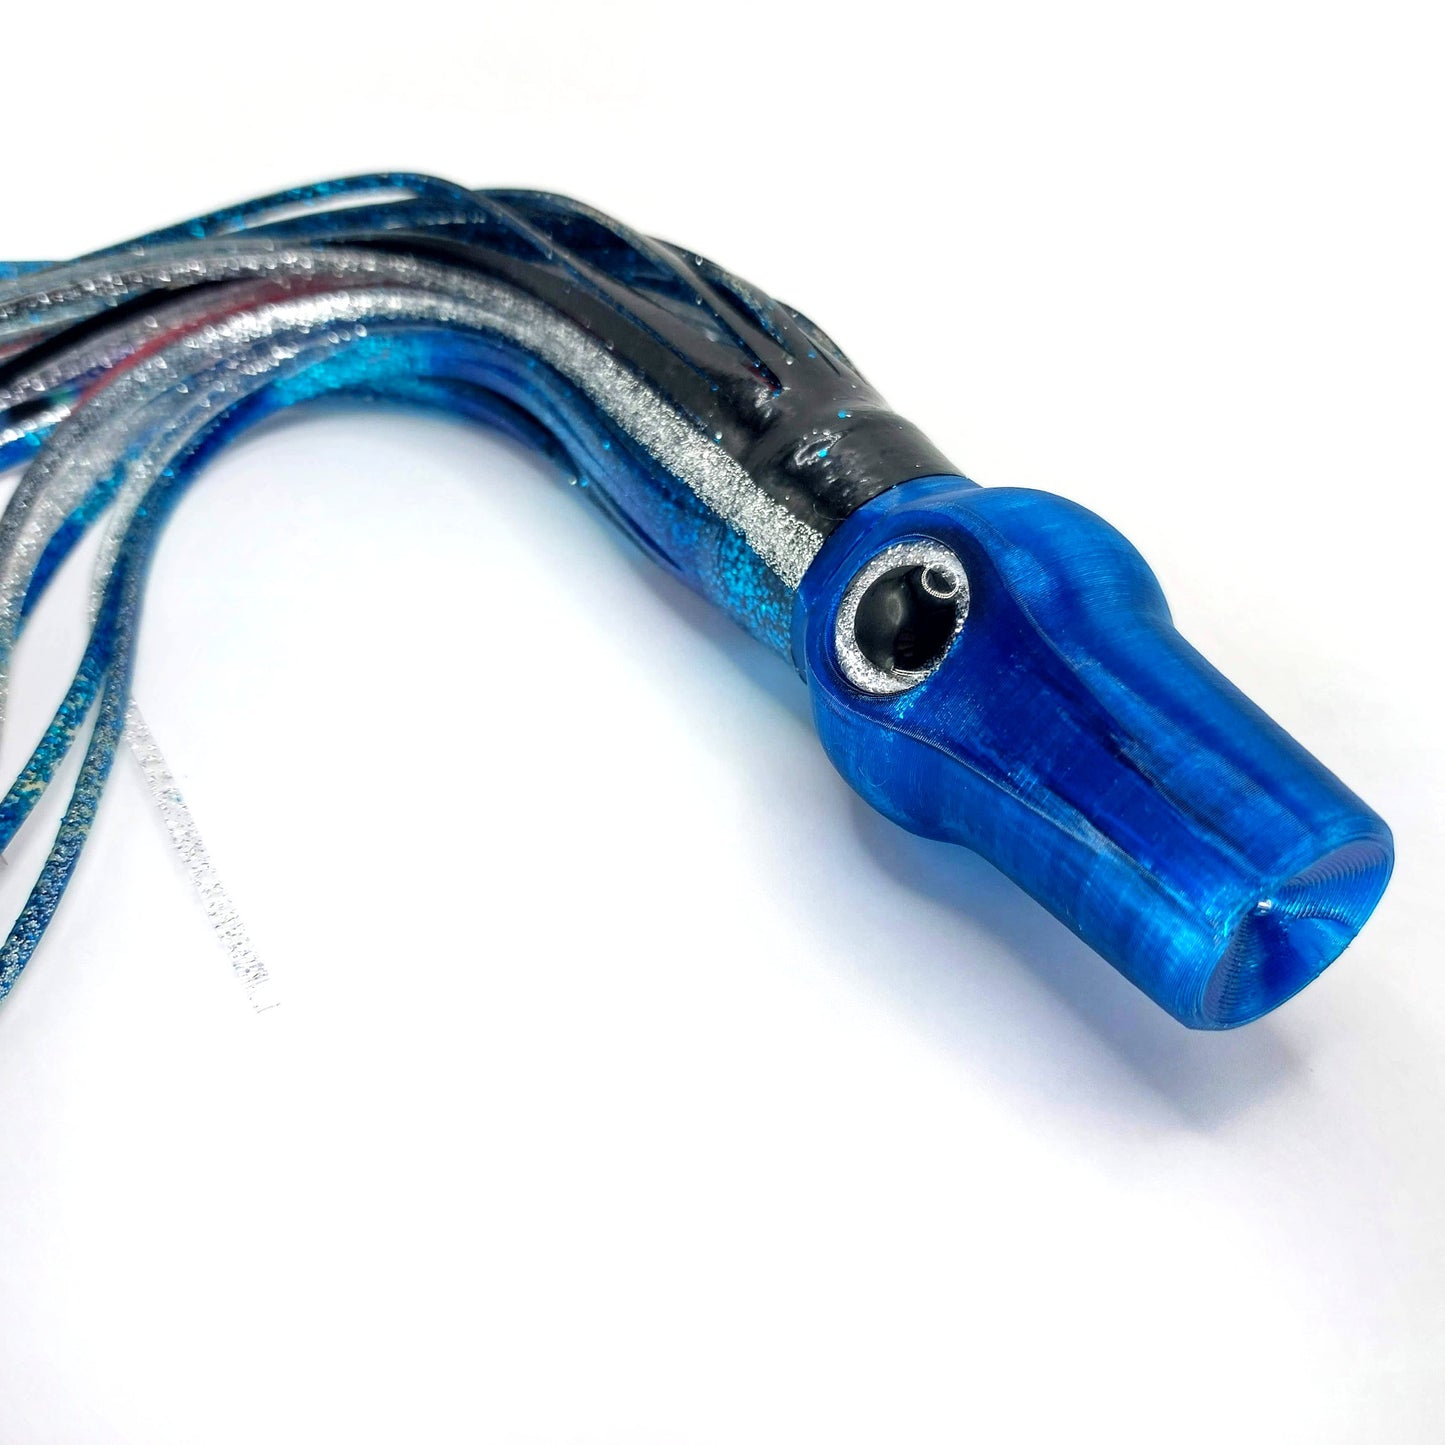 The Fujo S3.5 11" Offshore Trolling Lure - Evolution Lures